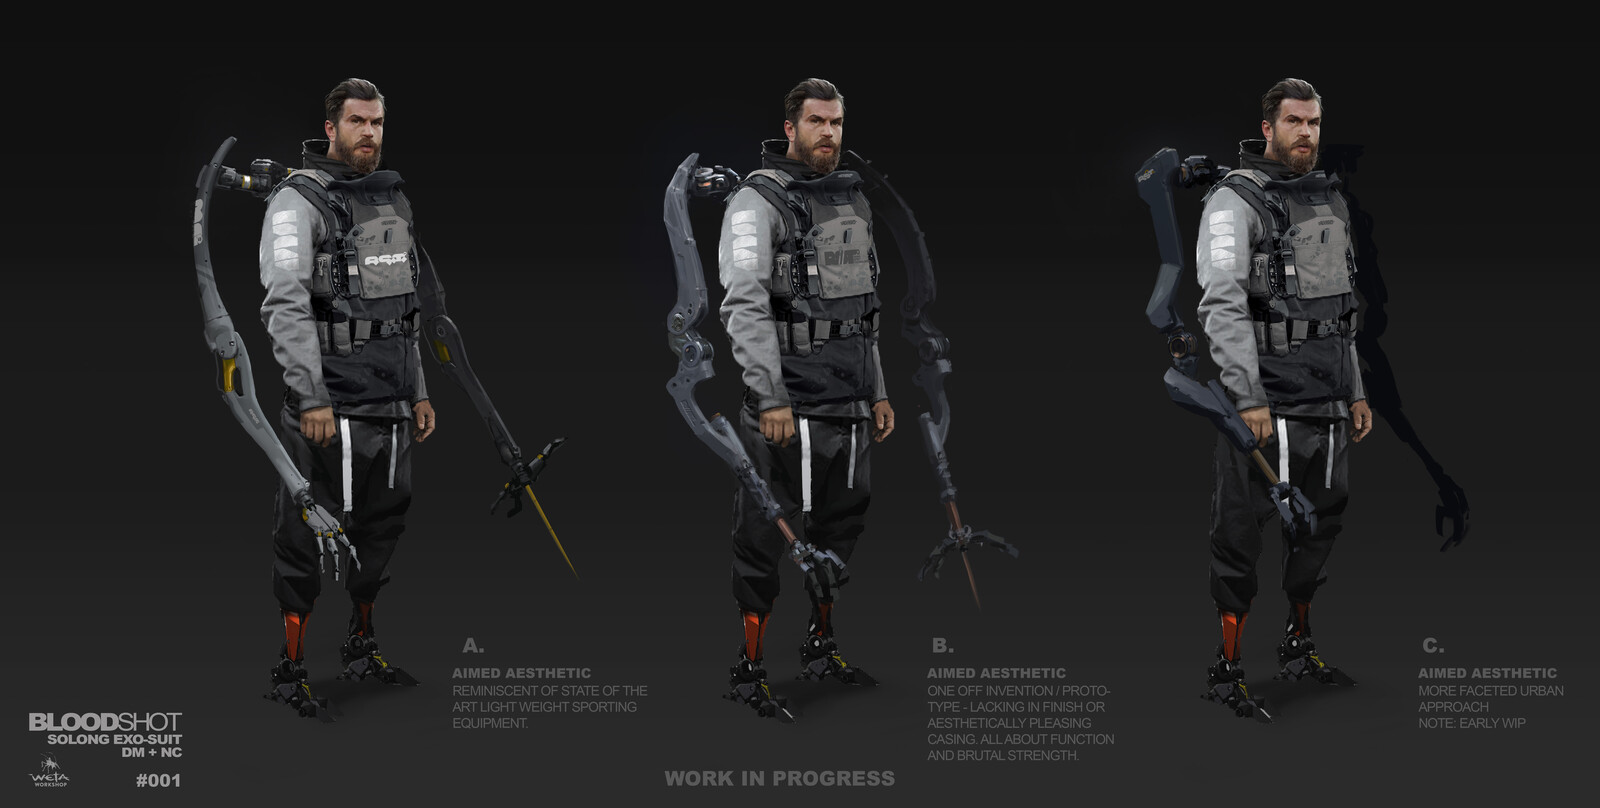 So Long Arm Concepts - Artist: Dane Madgwick (Costume: Nivanh Chanthara. Based on a concept by Tom Garden)